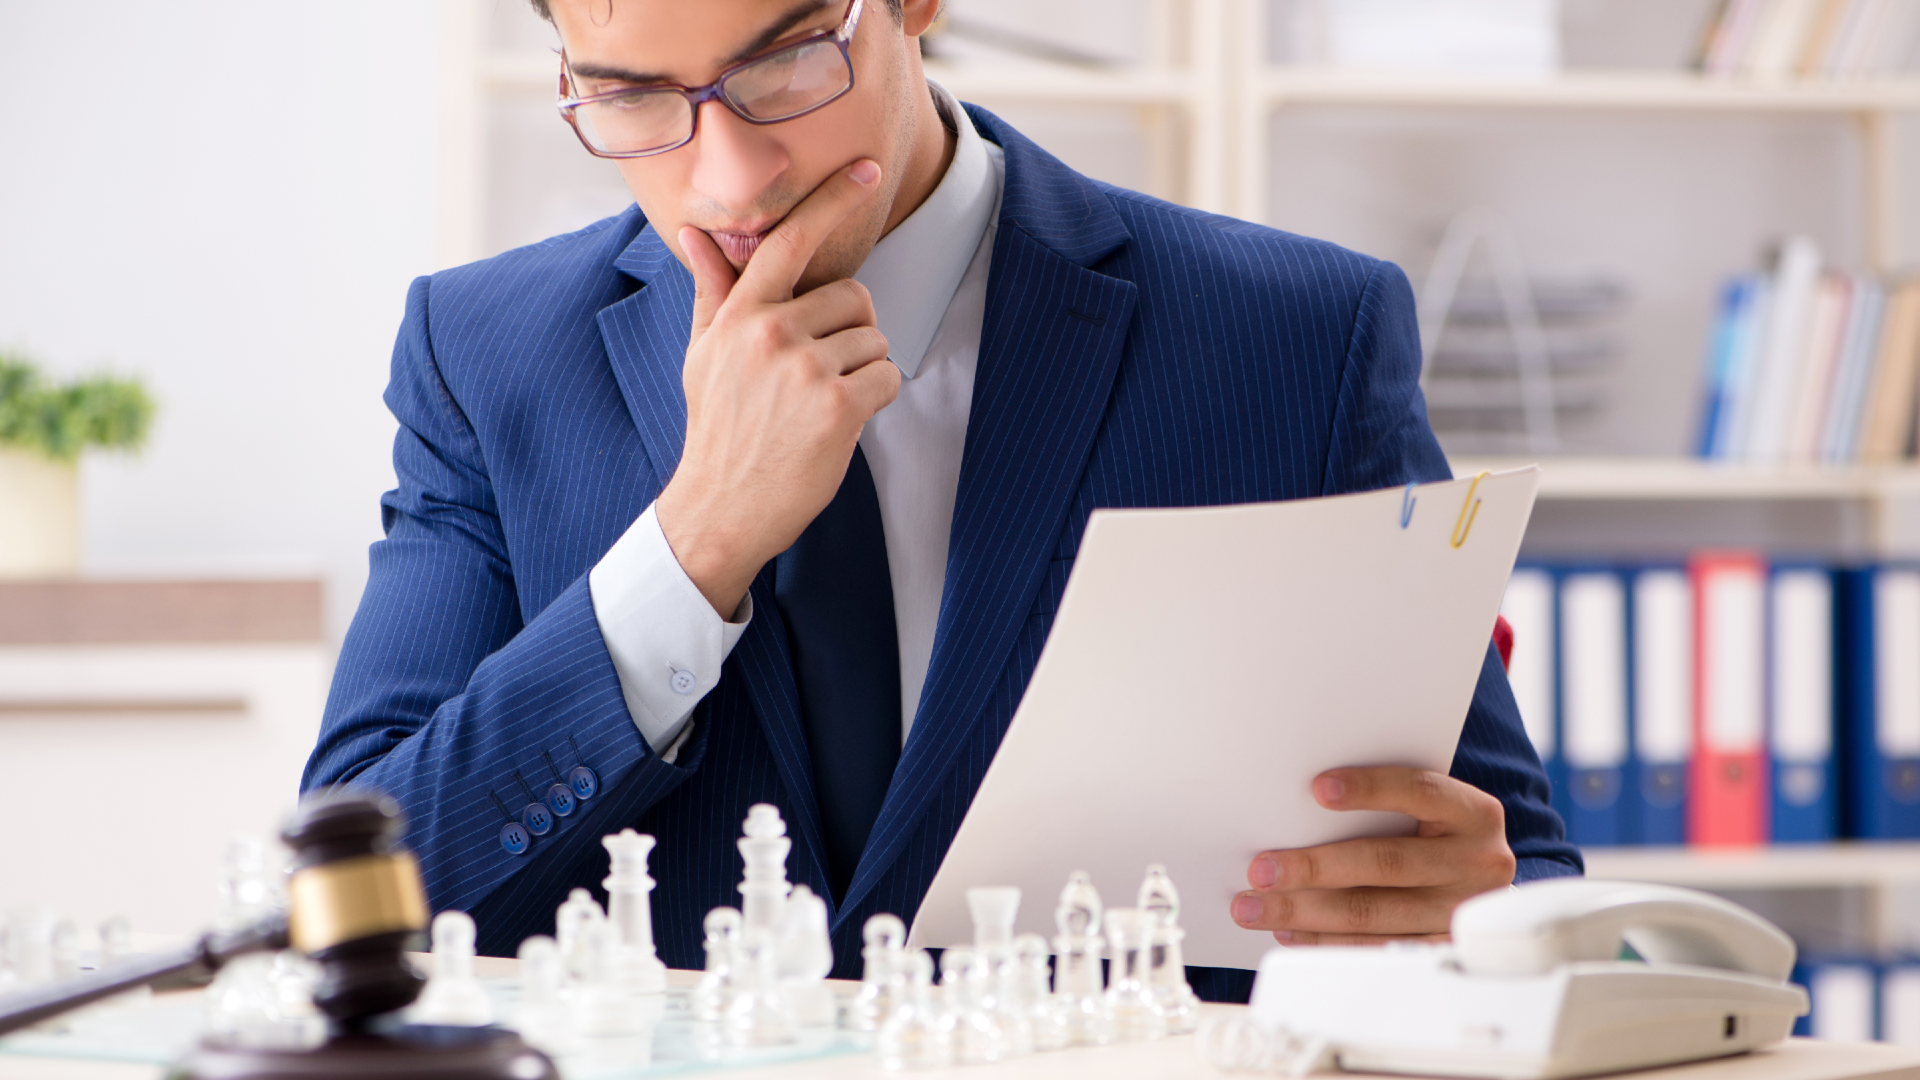 A lawyer looking at chess set with paperwork in hand